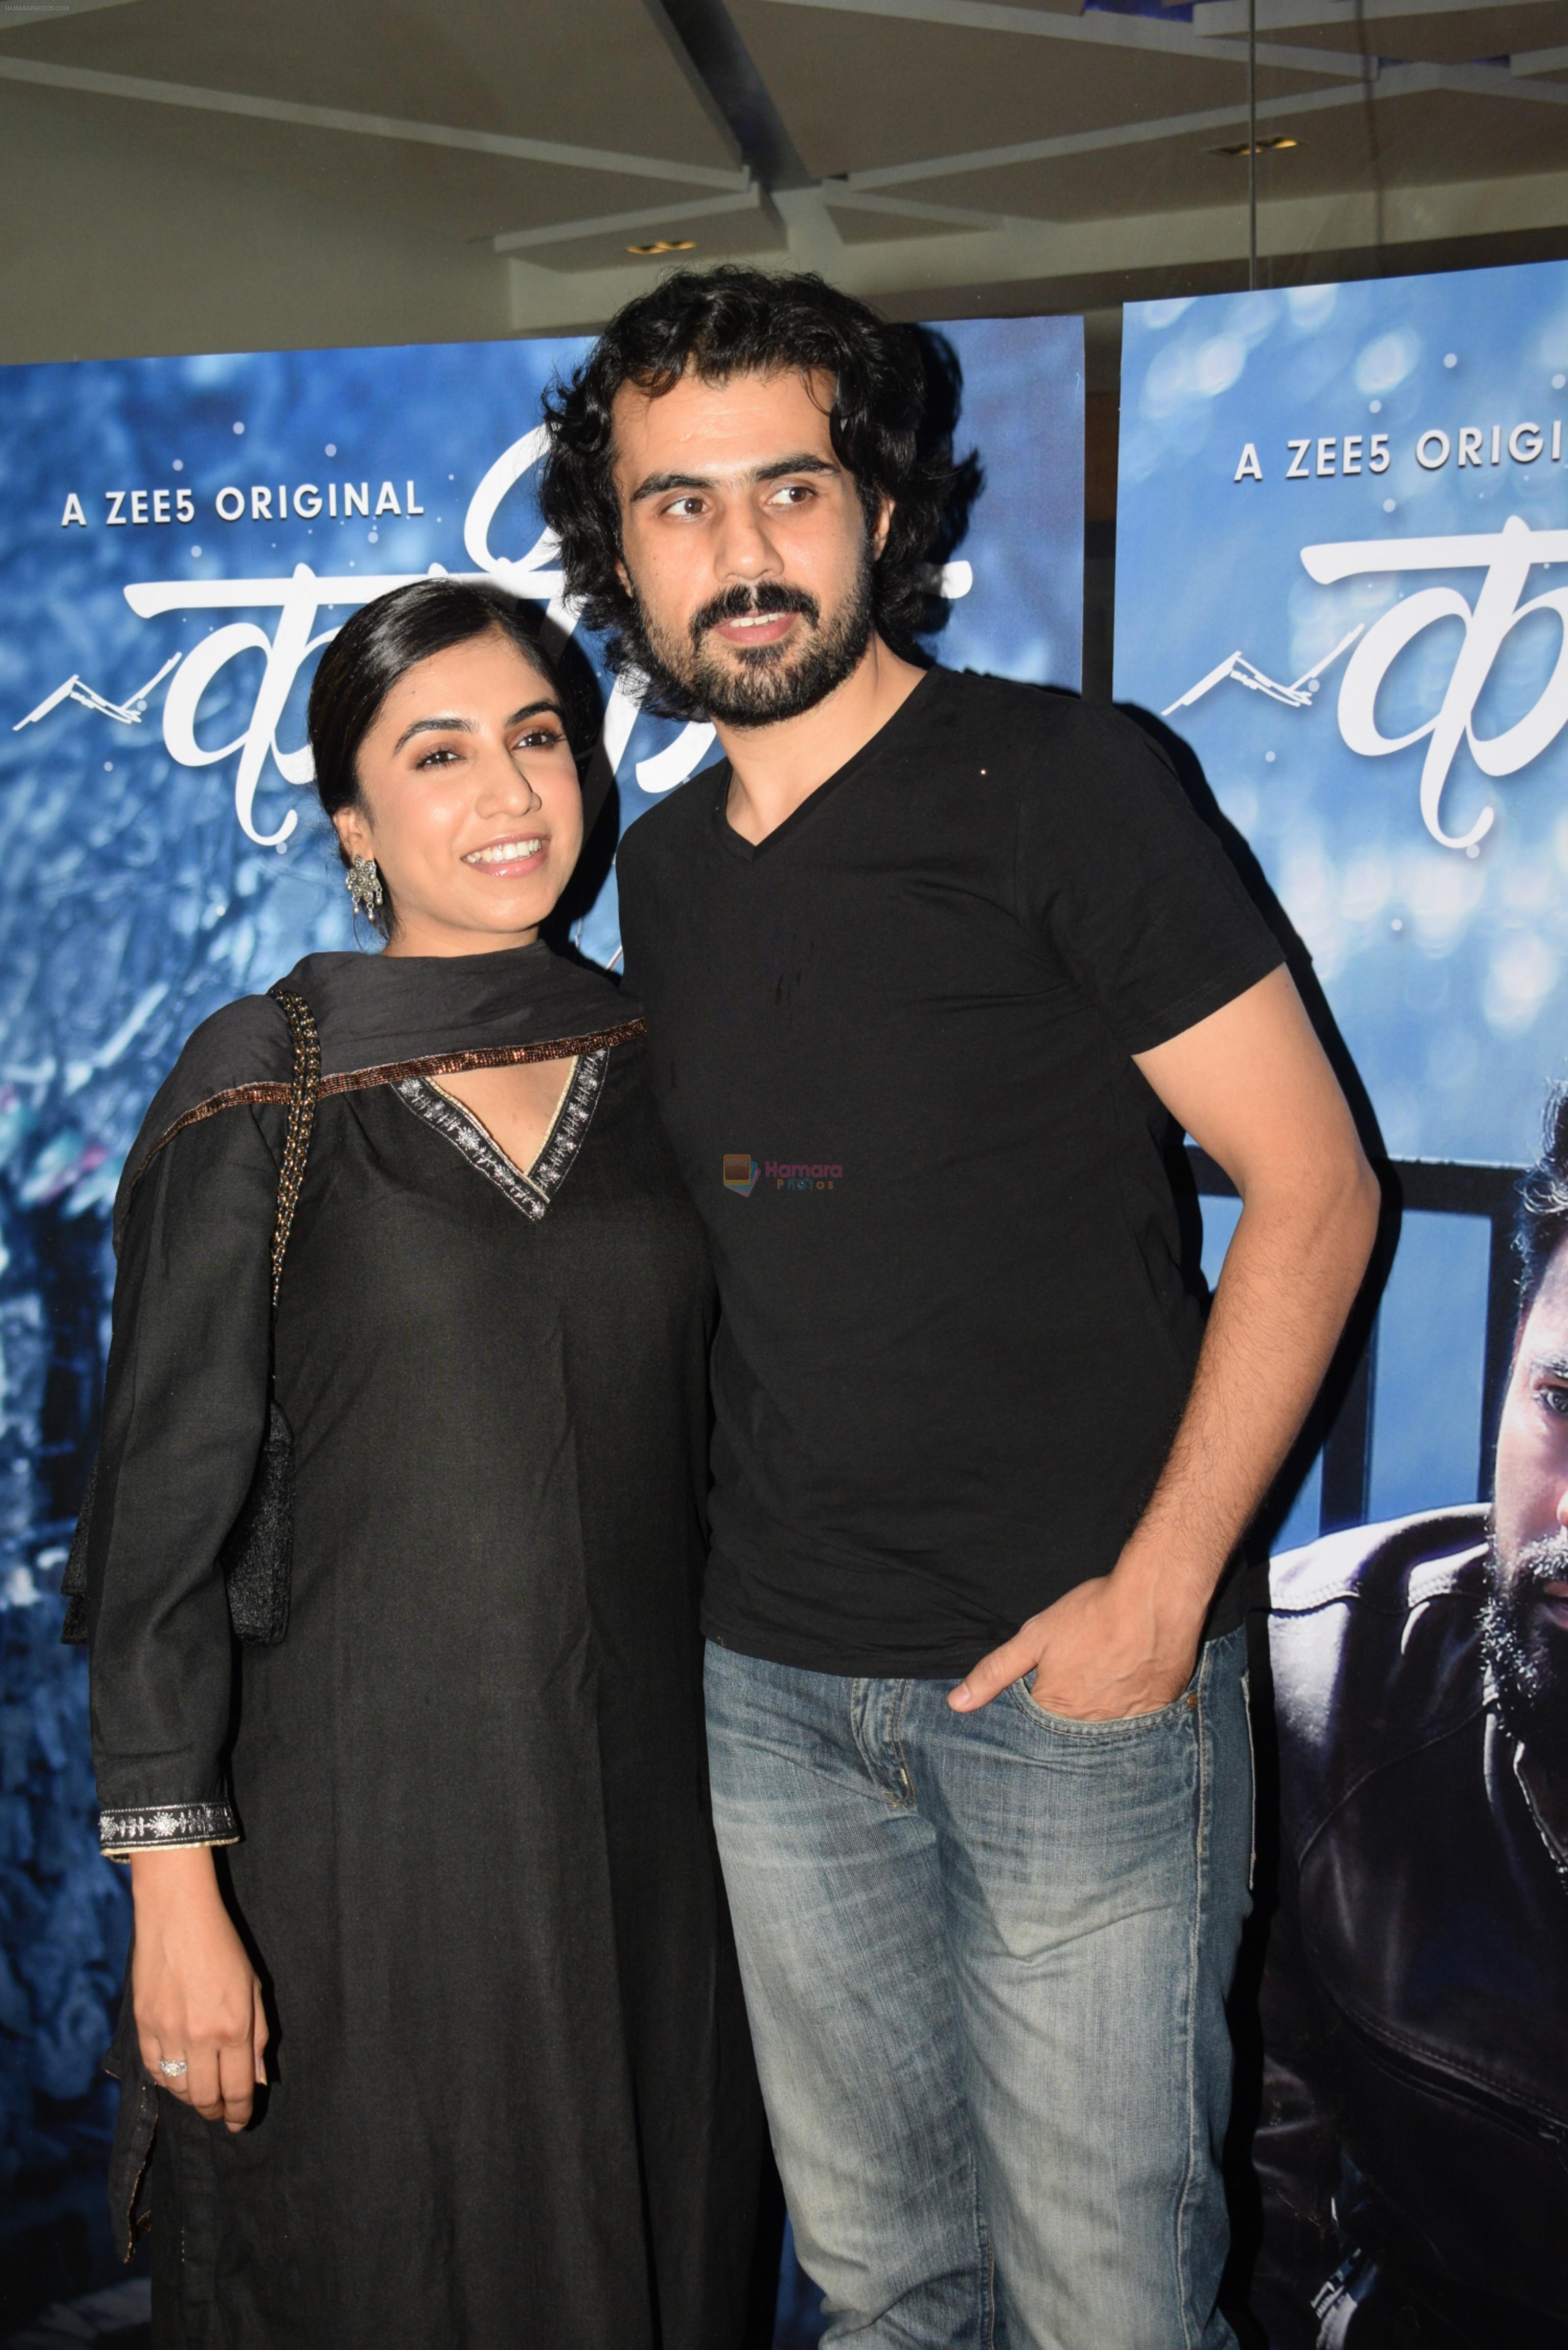 at the Screening of Zee5's original Kaafir in sunny sound juhu on 15th June 2019